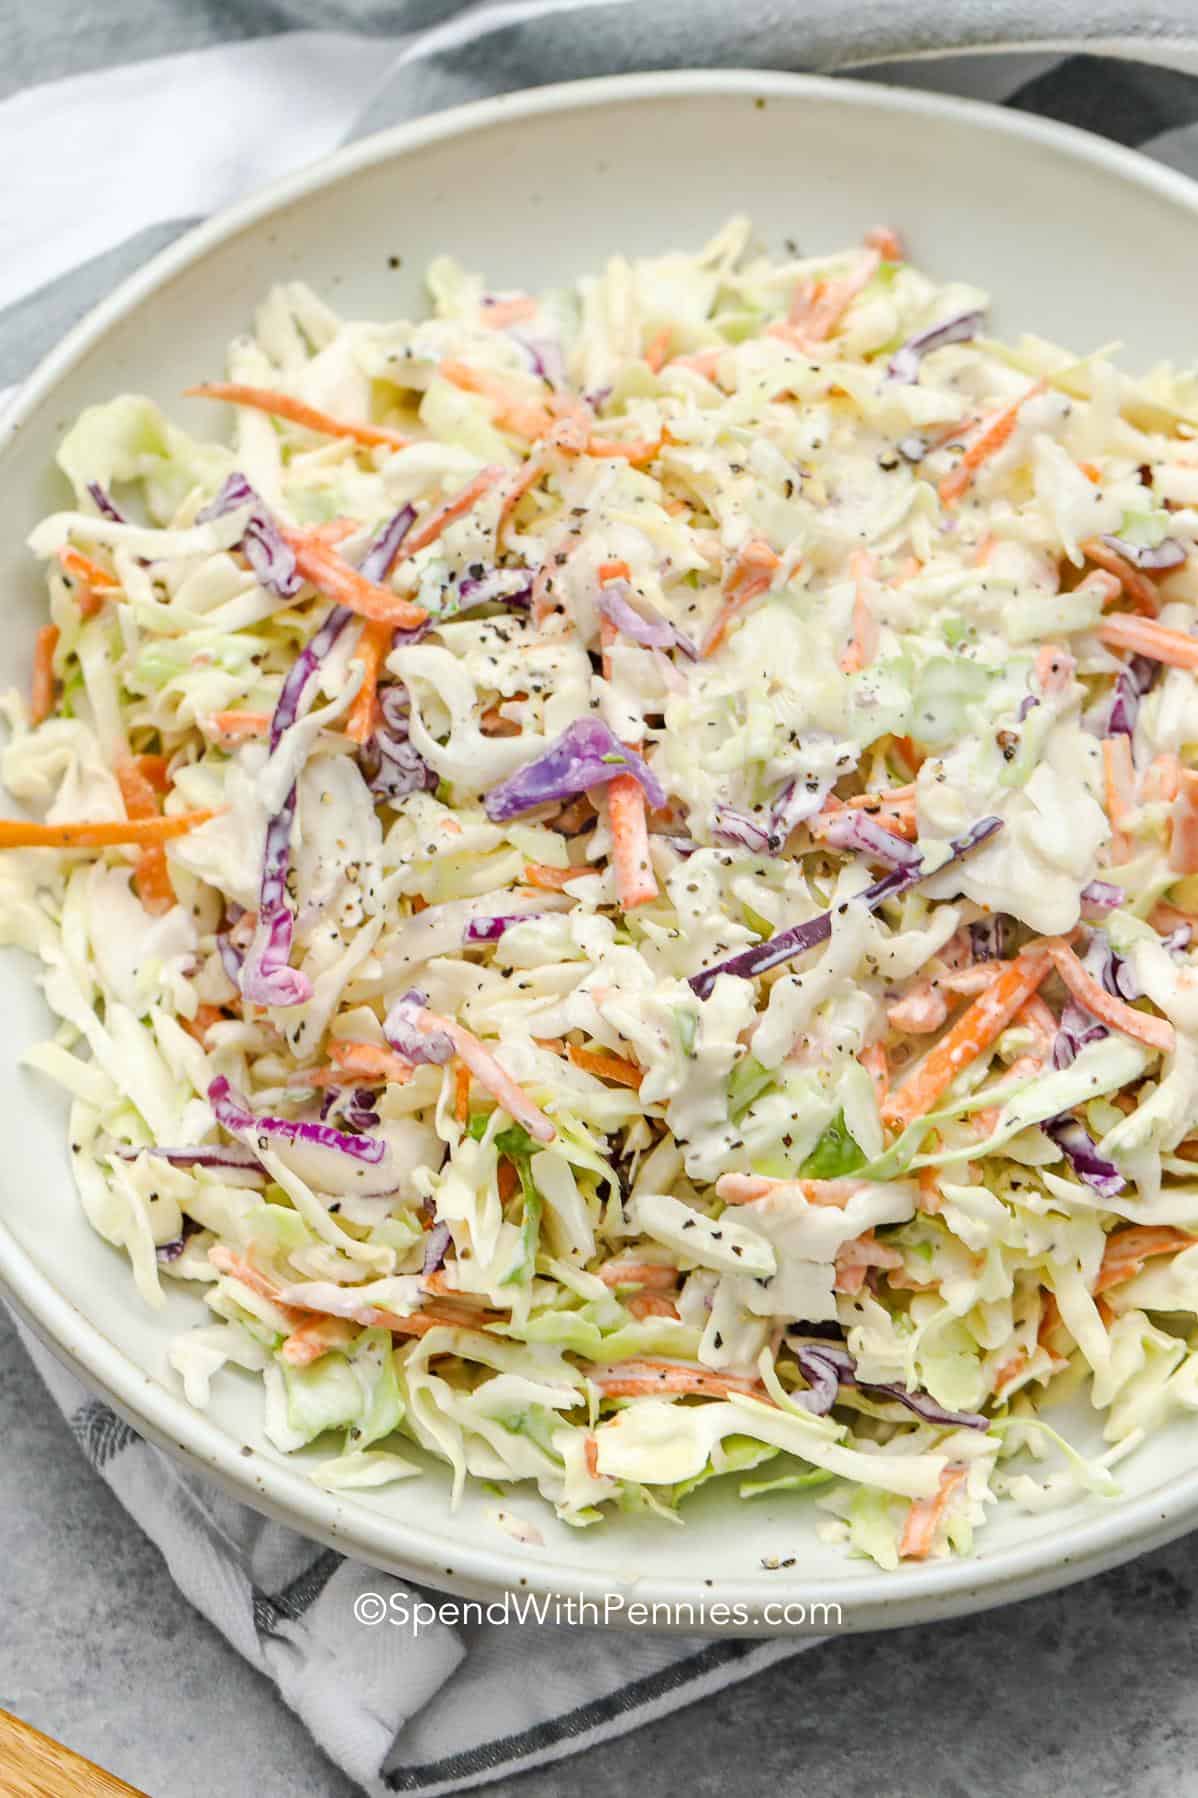  Say goodbye to boring salads with this deliciously creamy cabbage salad.